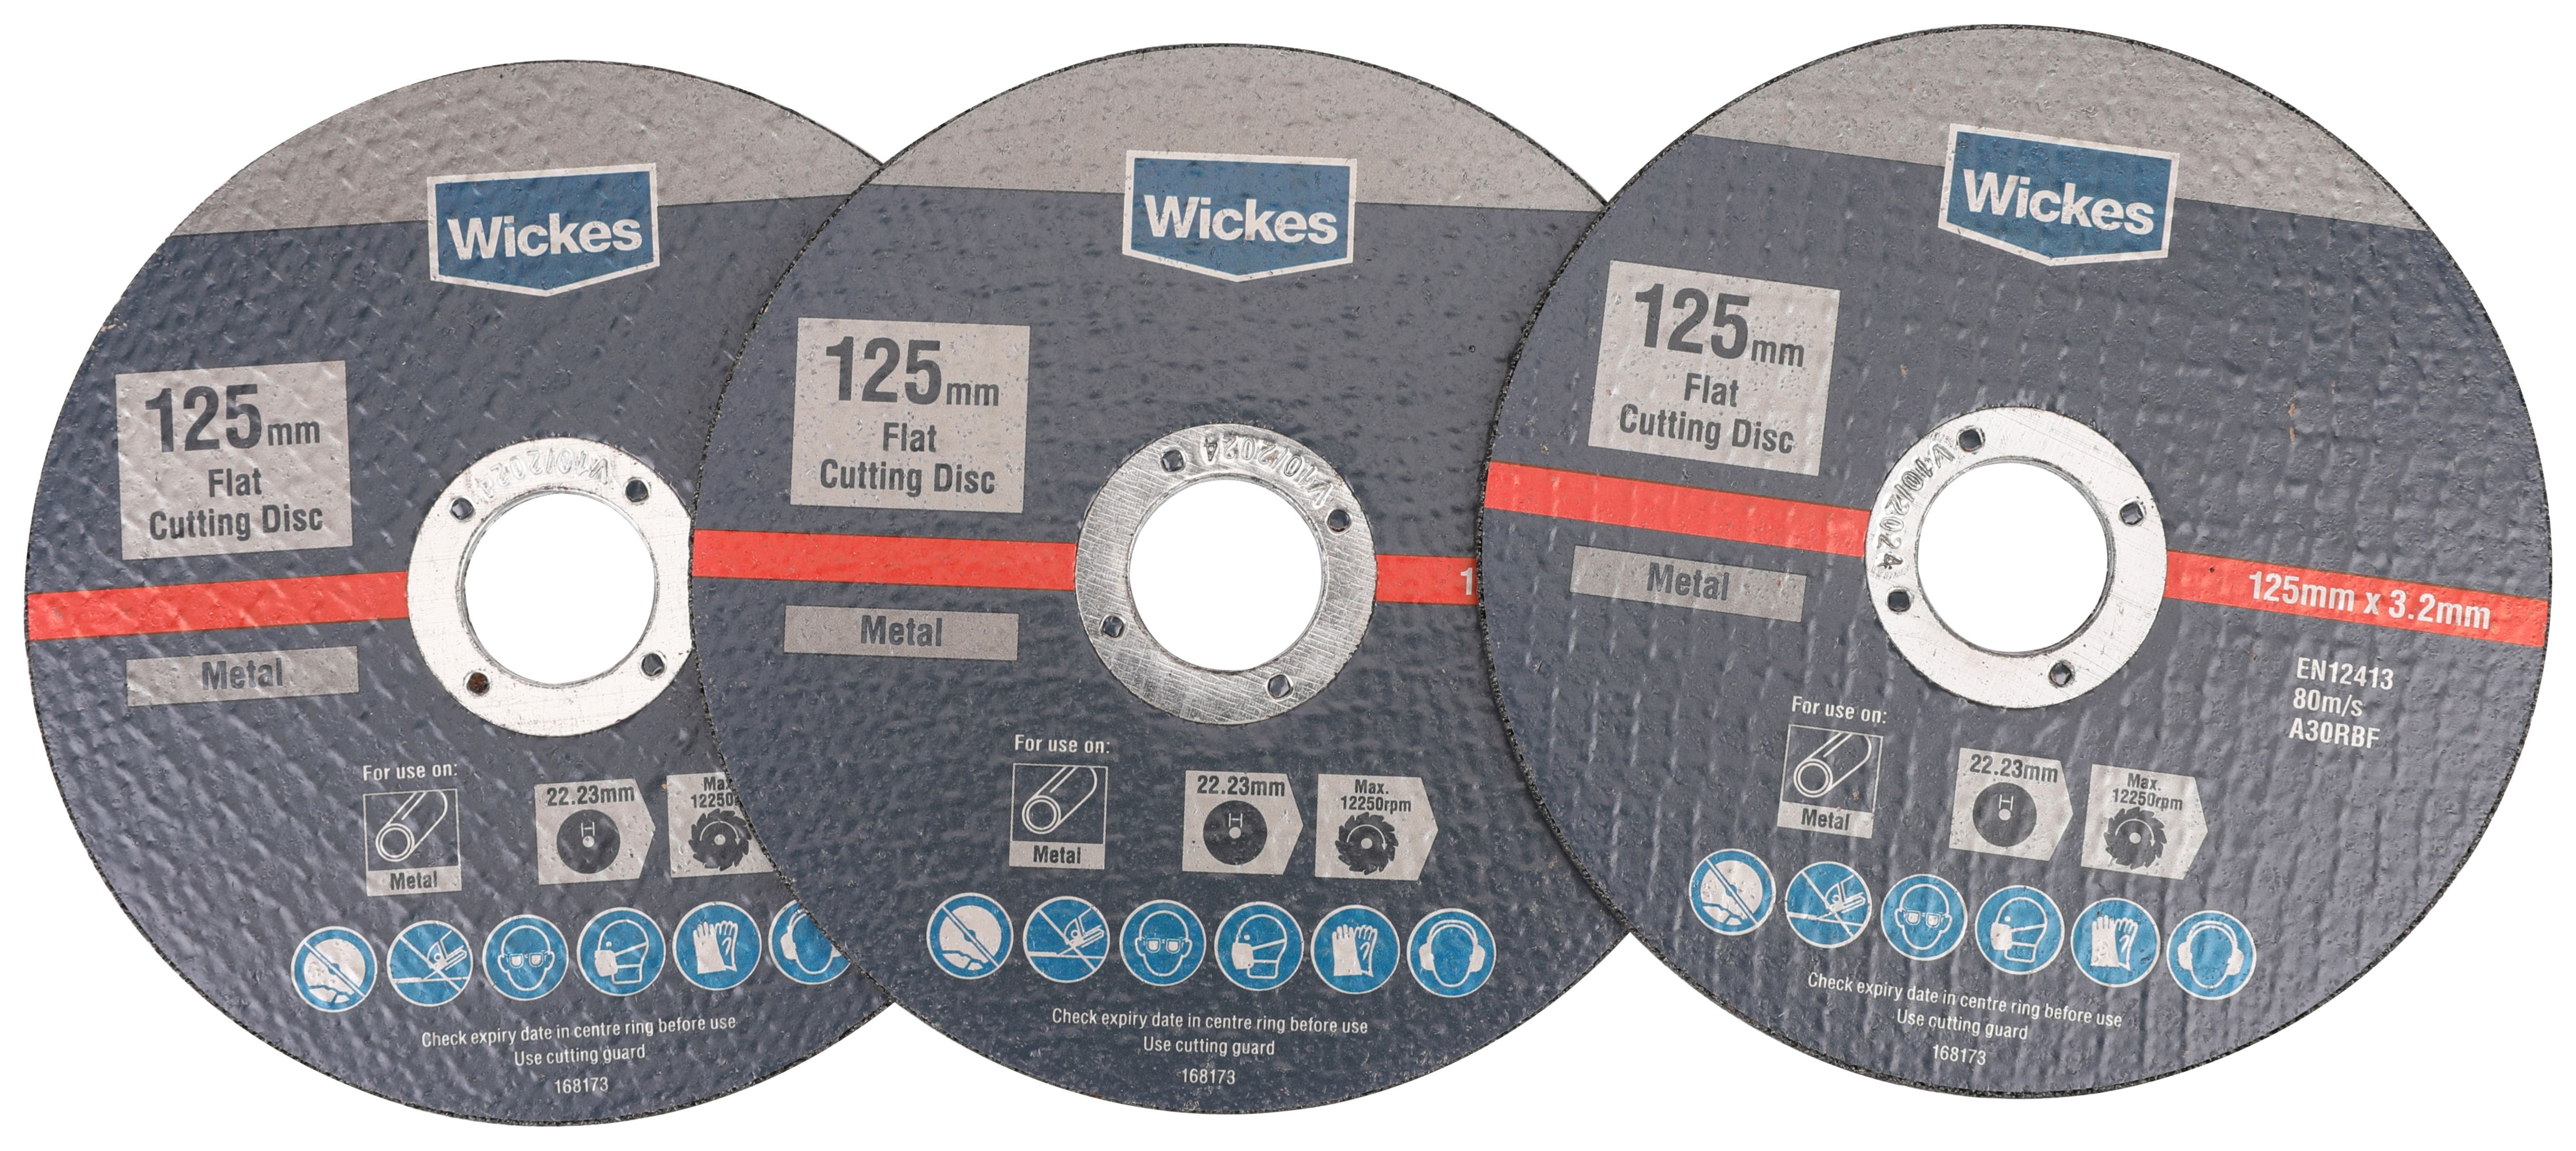 Wickes Metal Flat Cutting Disc 125mm - Pack of 3